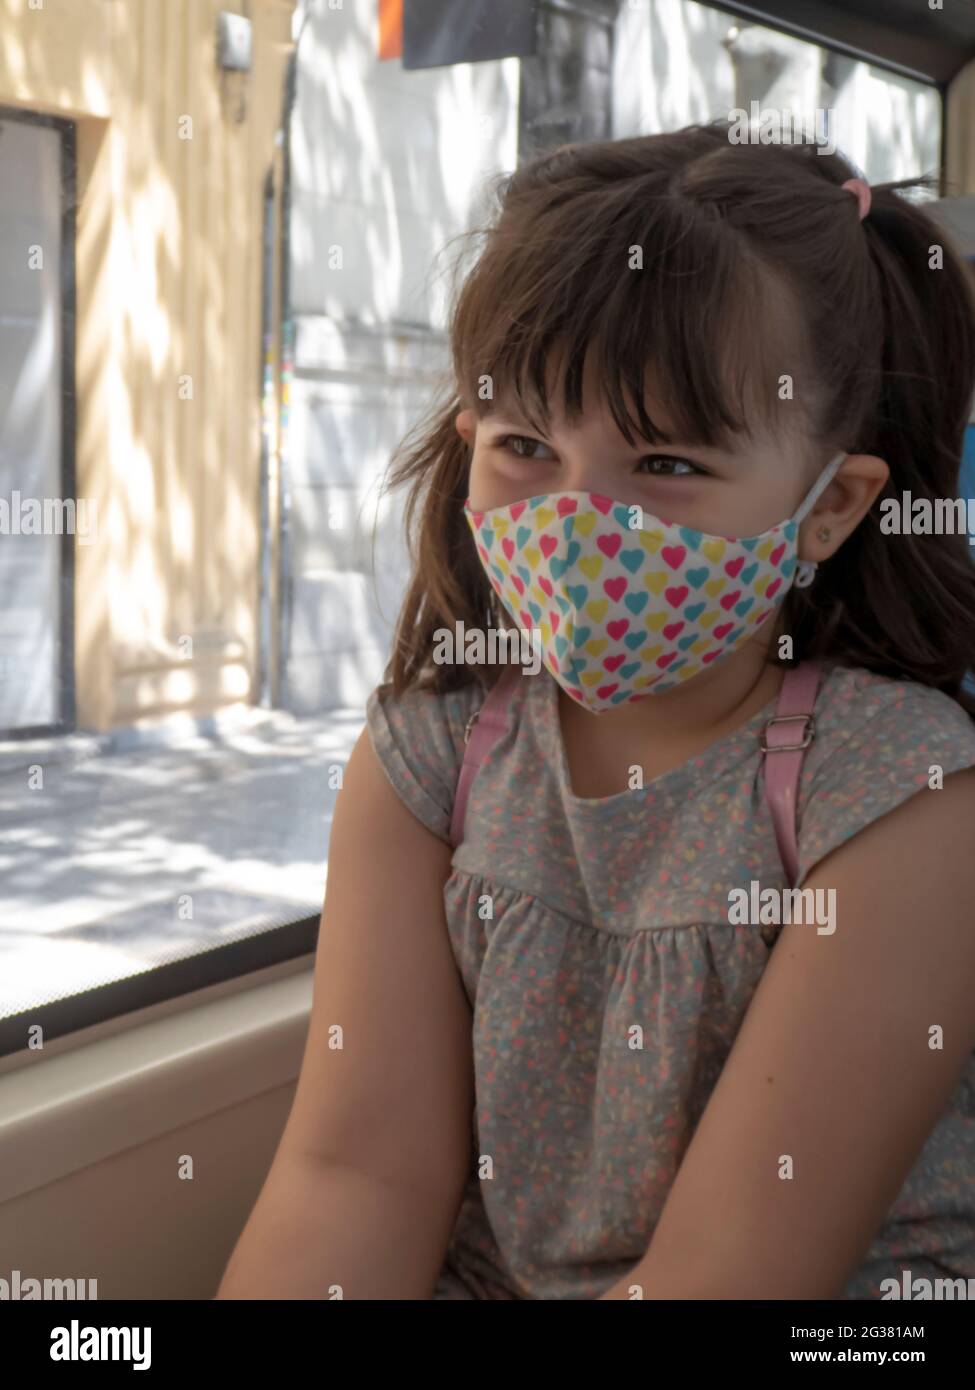 Little girl with a colorful face mask looking out the window of a bus in the city Stock Photo